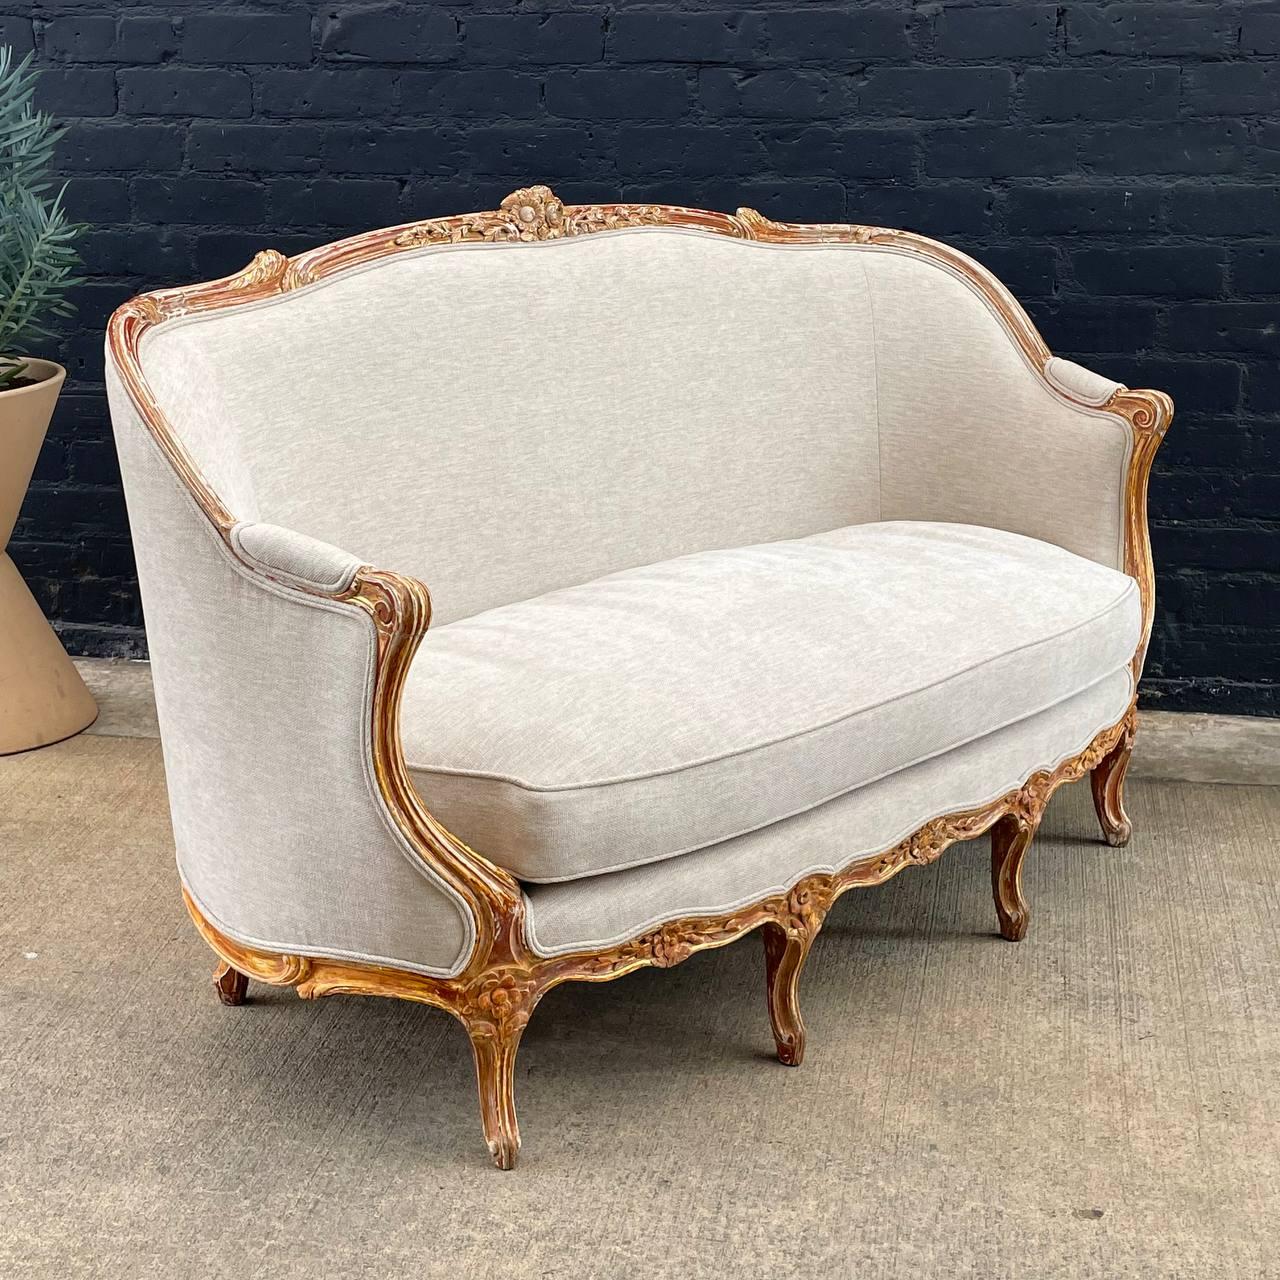 Early 20th Century Antique French Louis XVI Sofa with Carved Details For Sale